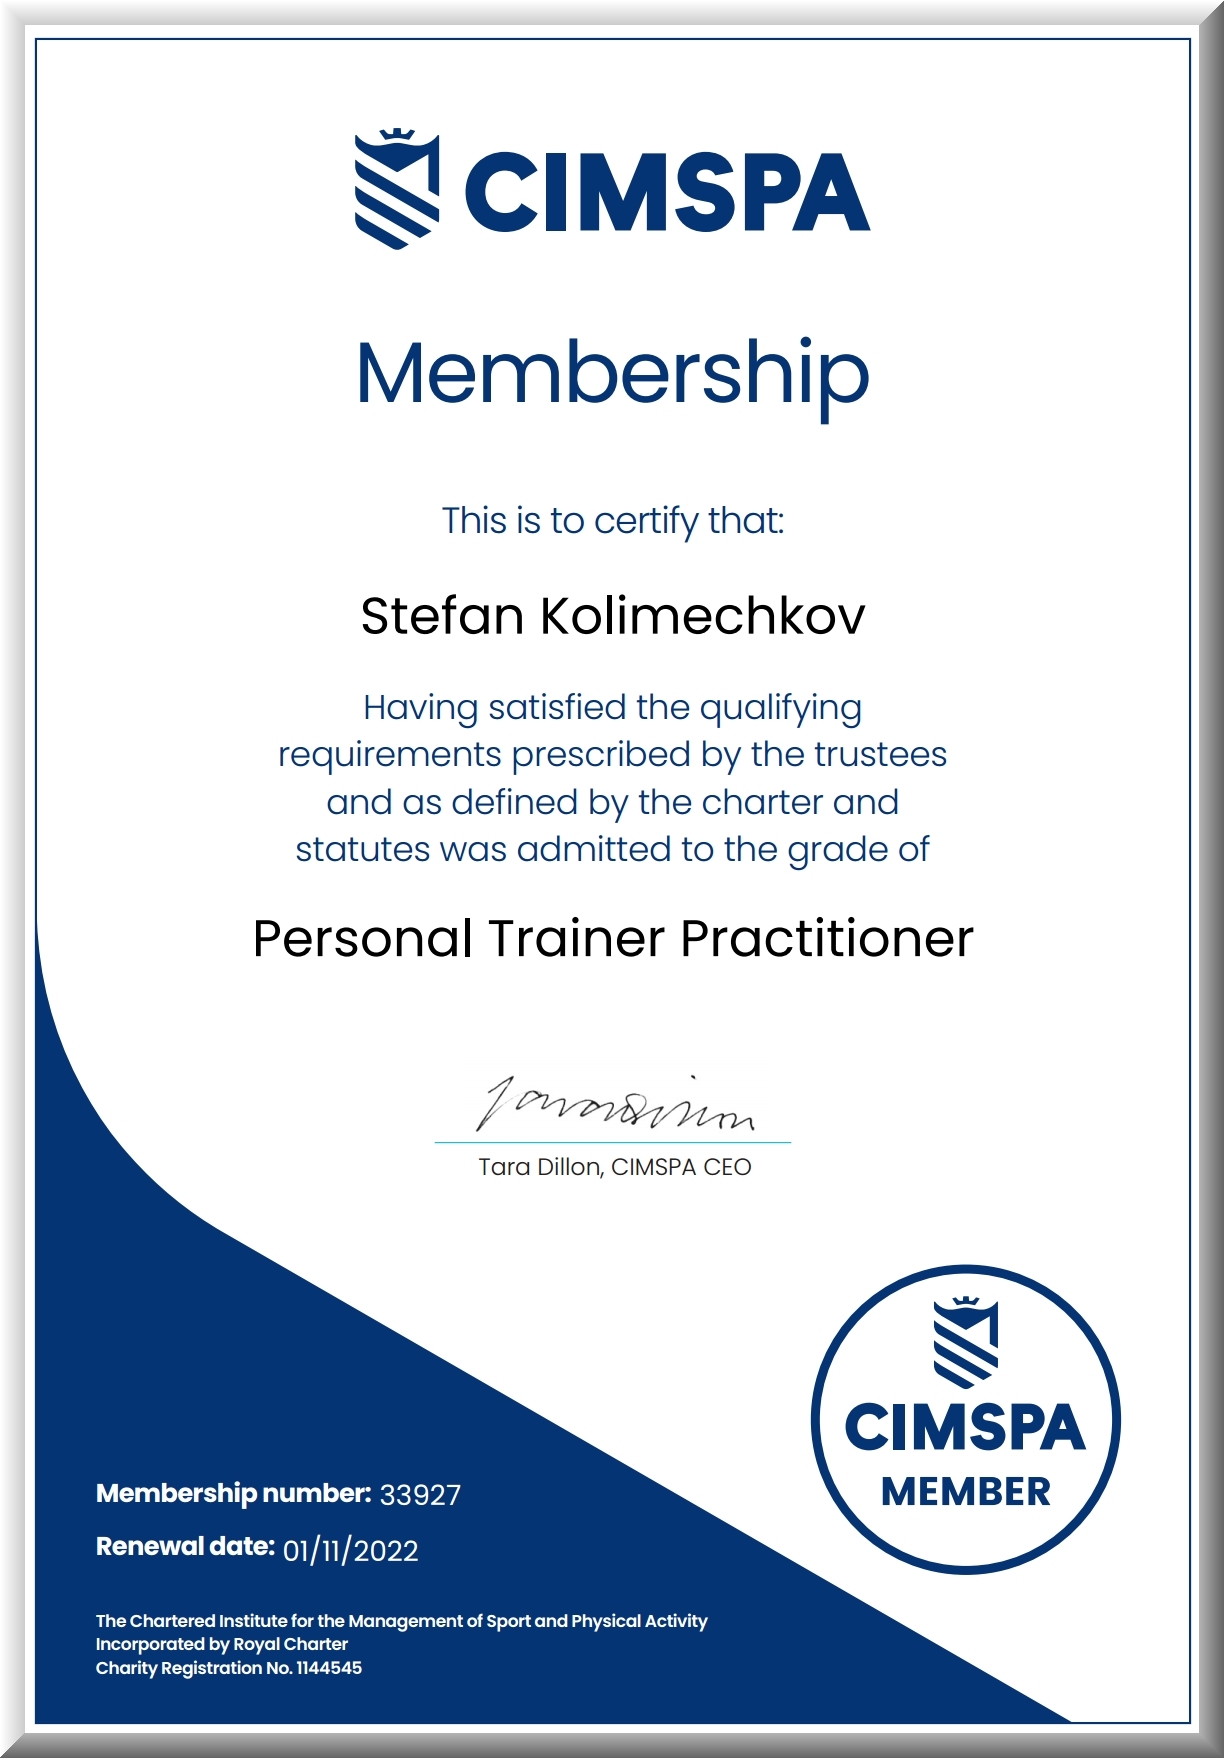 Personal Trainer Practitioner